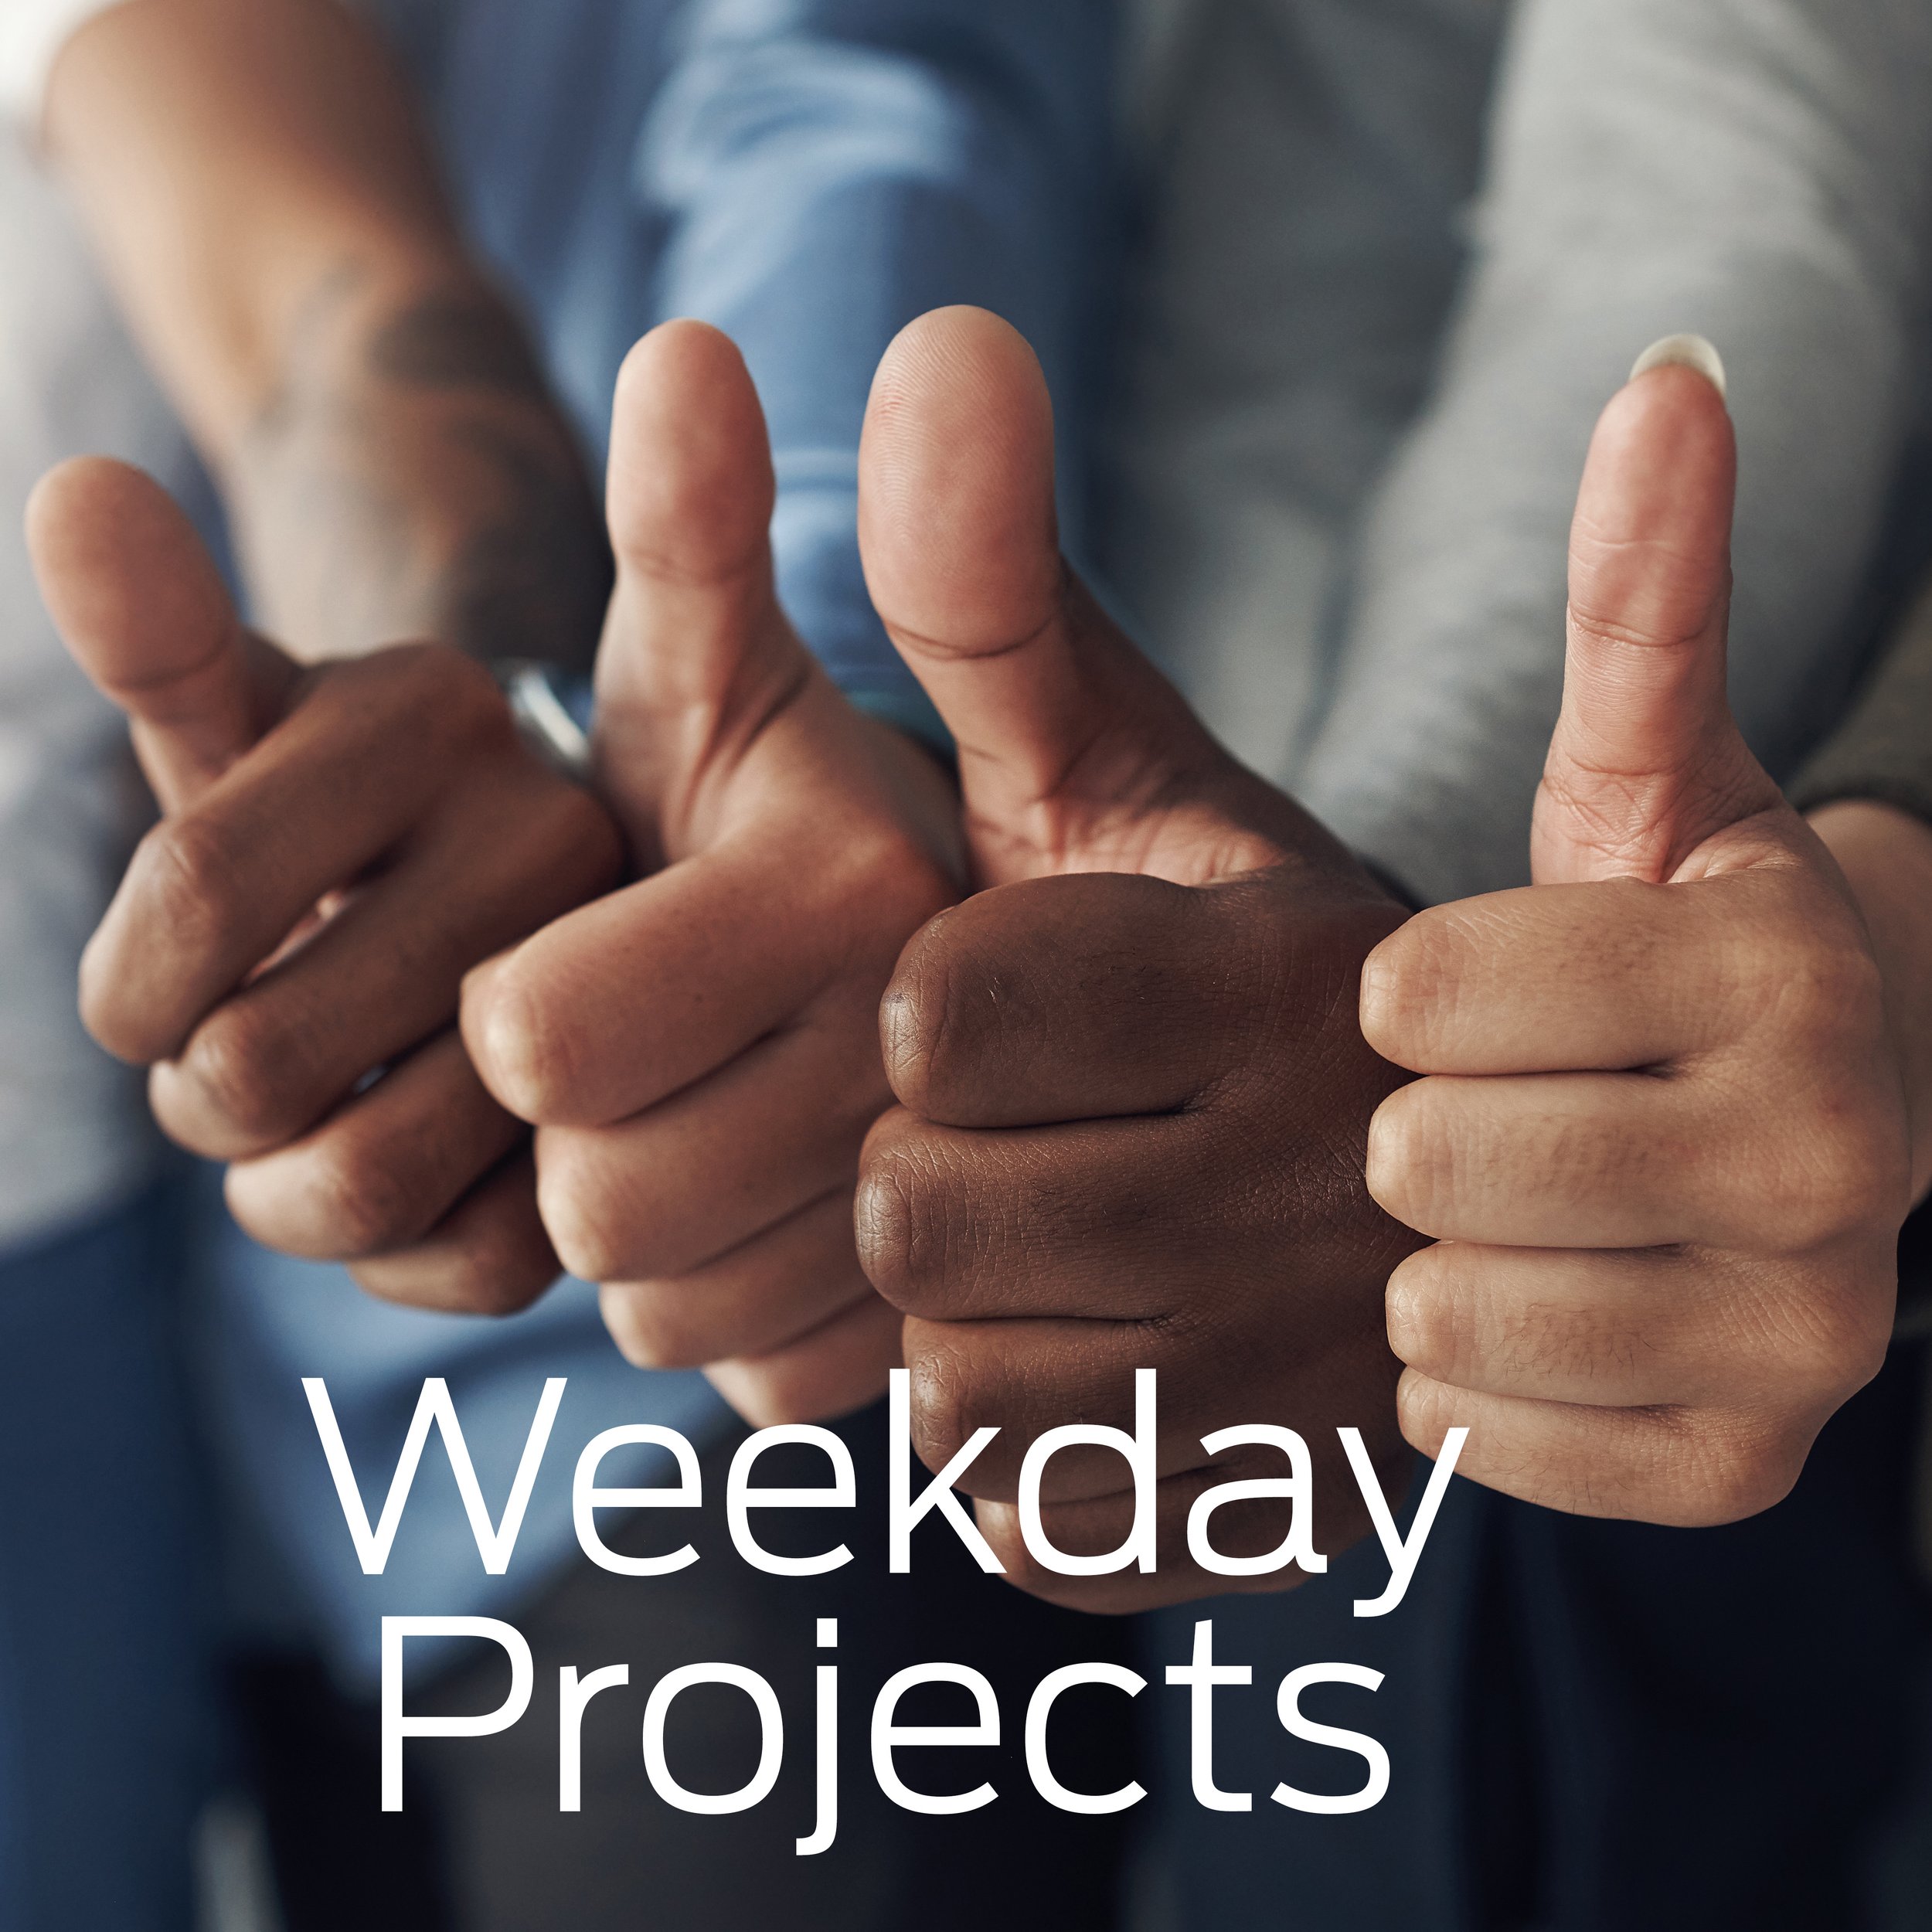 weekday projects for serving.jpg